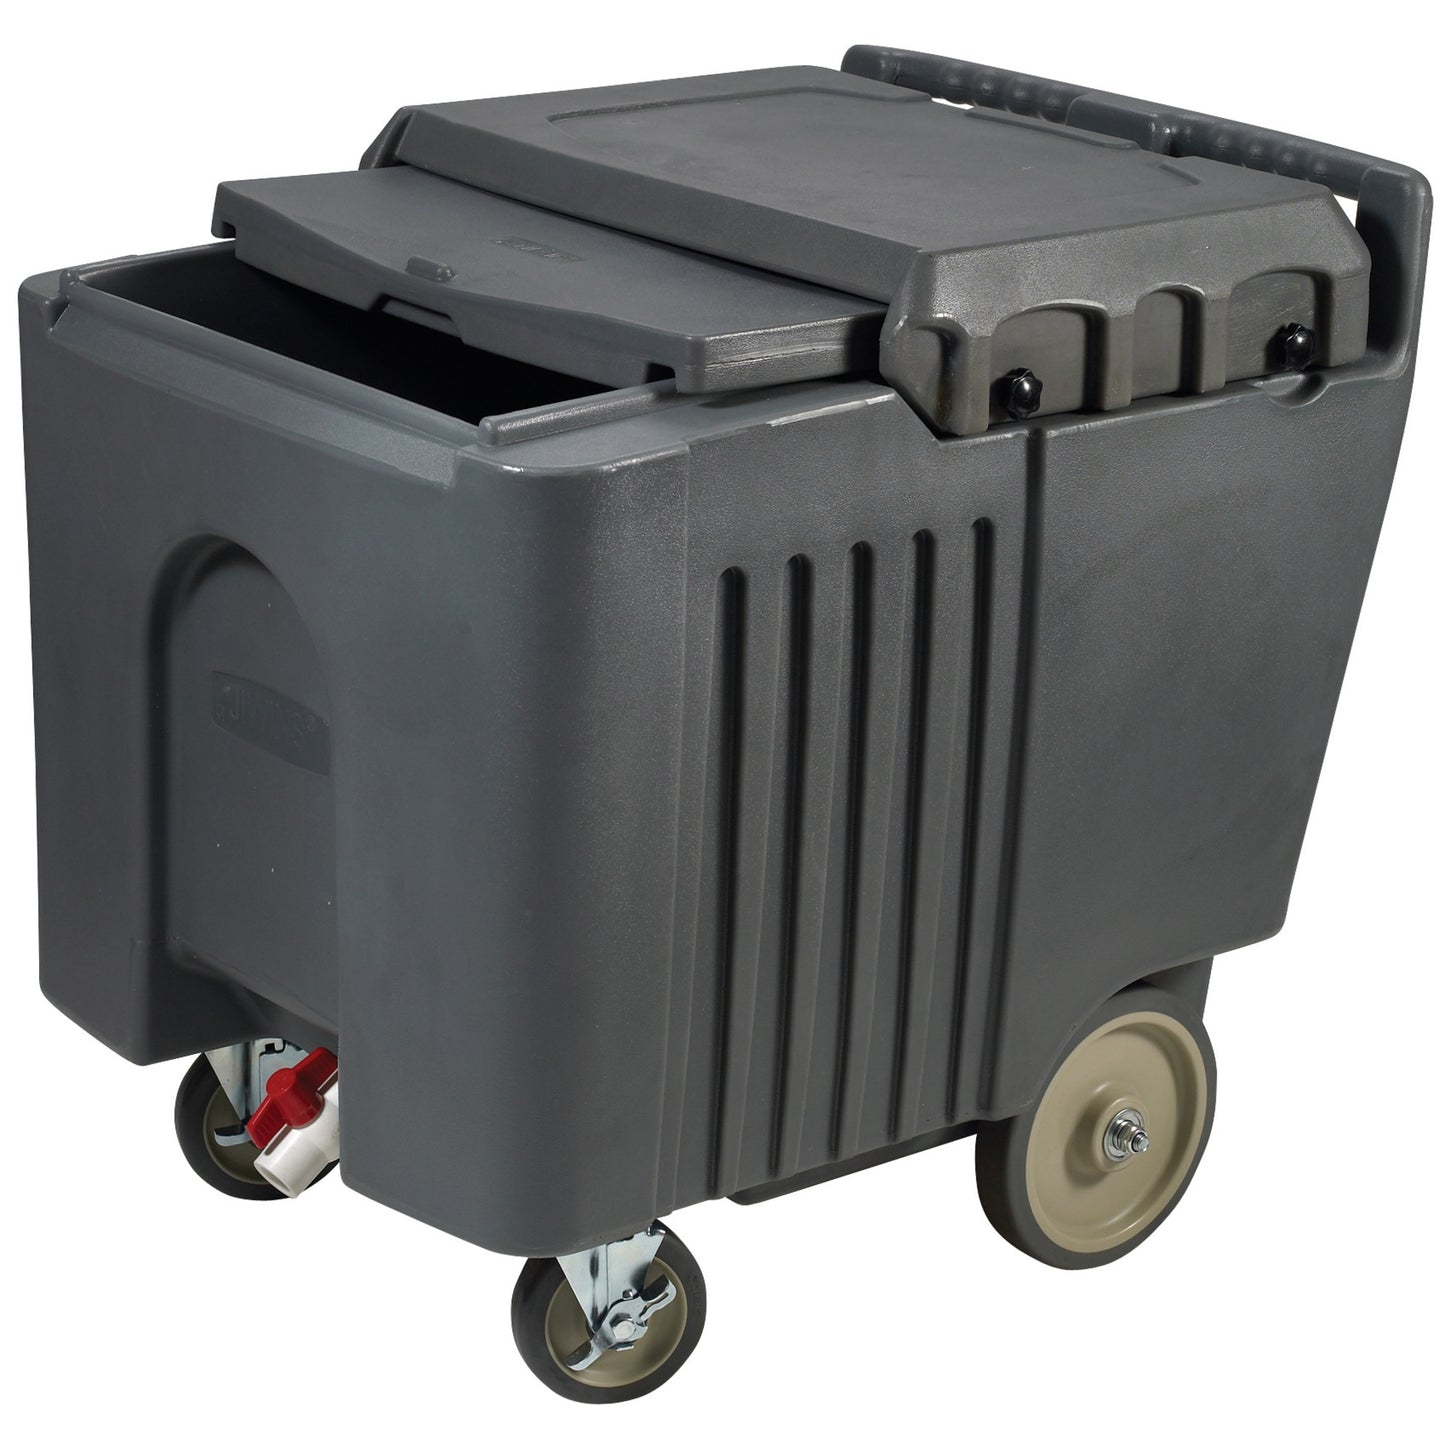 IIC-29 - Insulated Ice Caddy with Sliding Lid